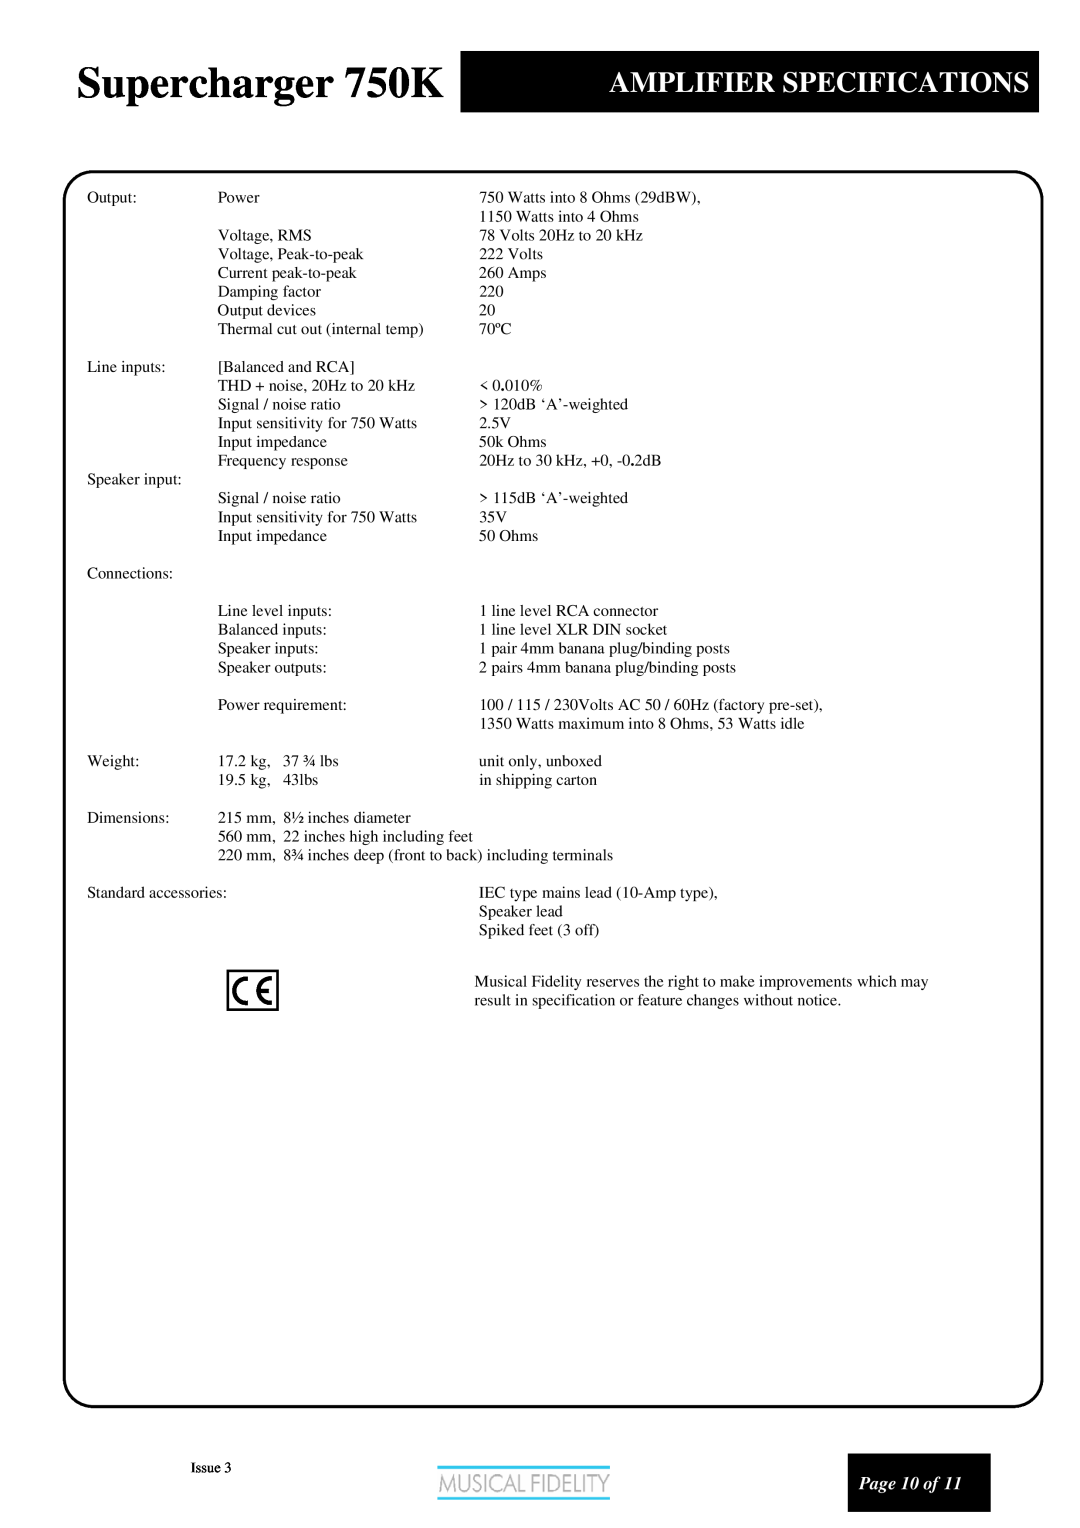 Musical Fidelity manual Amplifier Specifications, Supercharger 750K, Page 10 of 